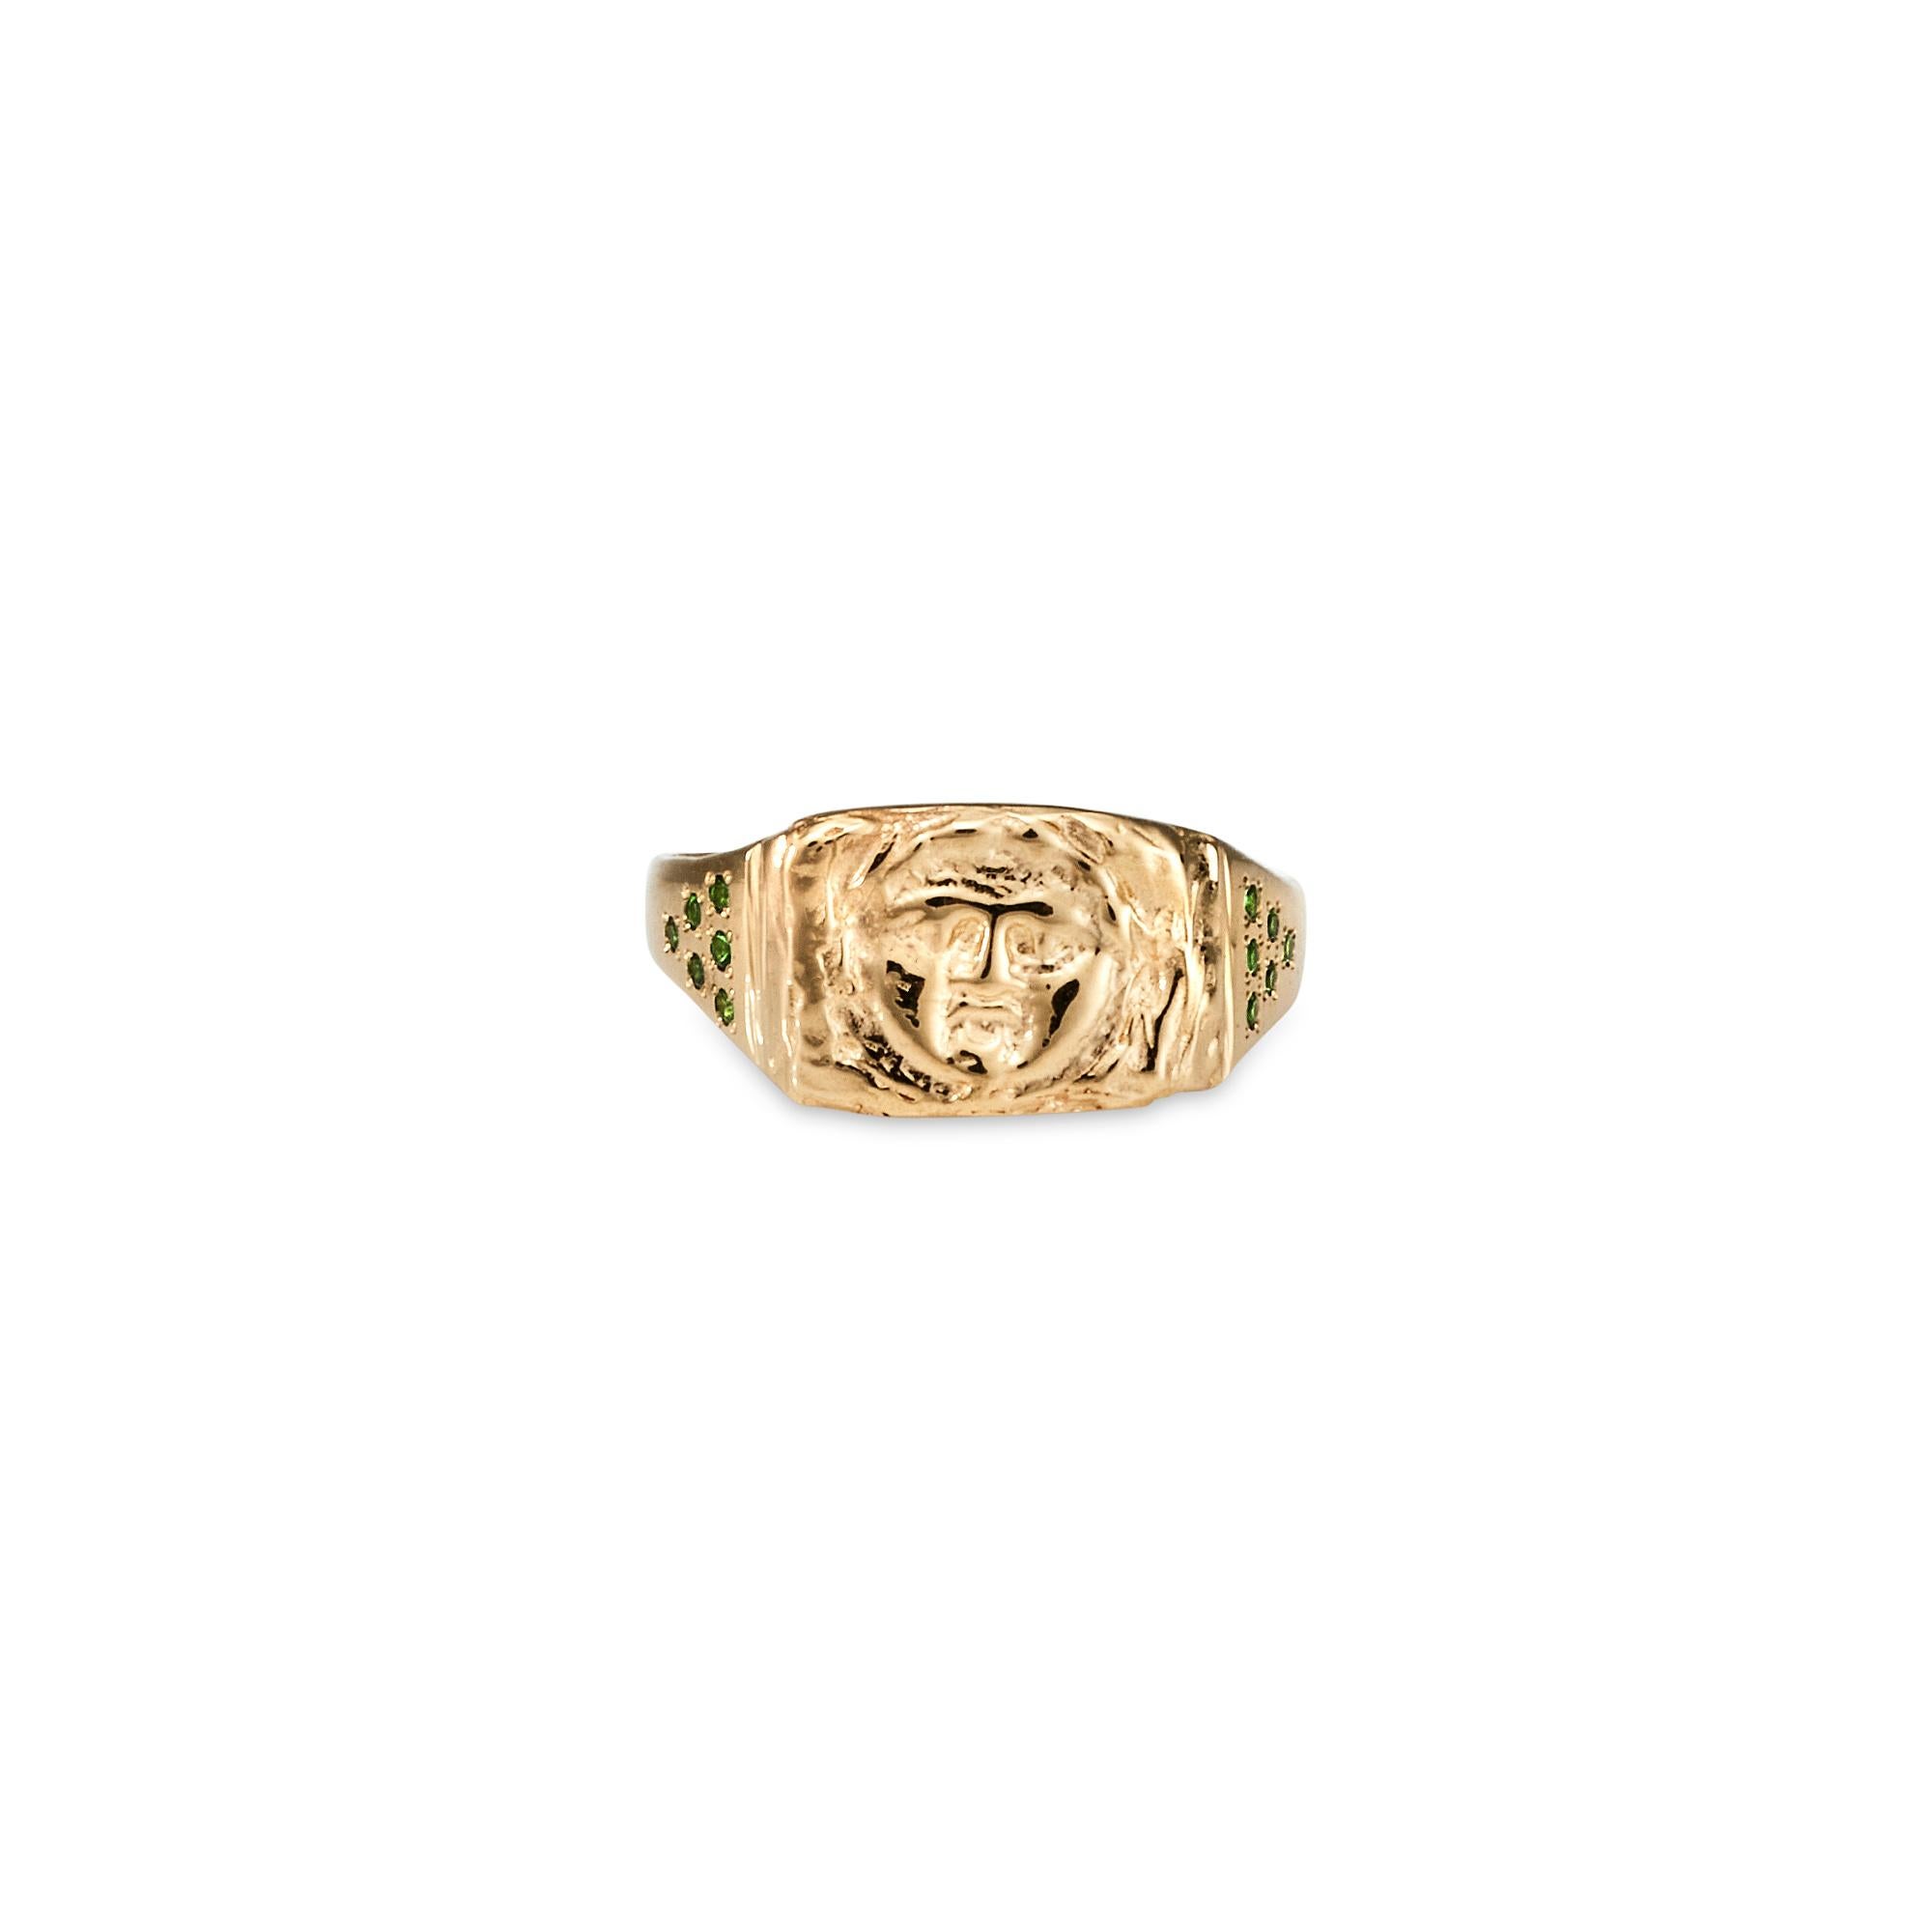 Gorgoneion Signet Ring, 14 Karat Yellow Gold with Tsavorite Garnet
Handcrafted and individually cast in solid gold. Olivia carves each piece from wax, making these items unique, which we believe is what gives them their beauty. The Gorgoneion Signet